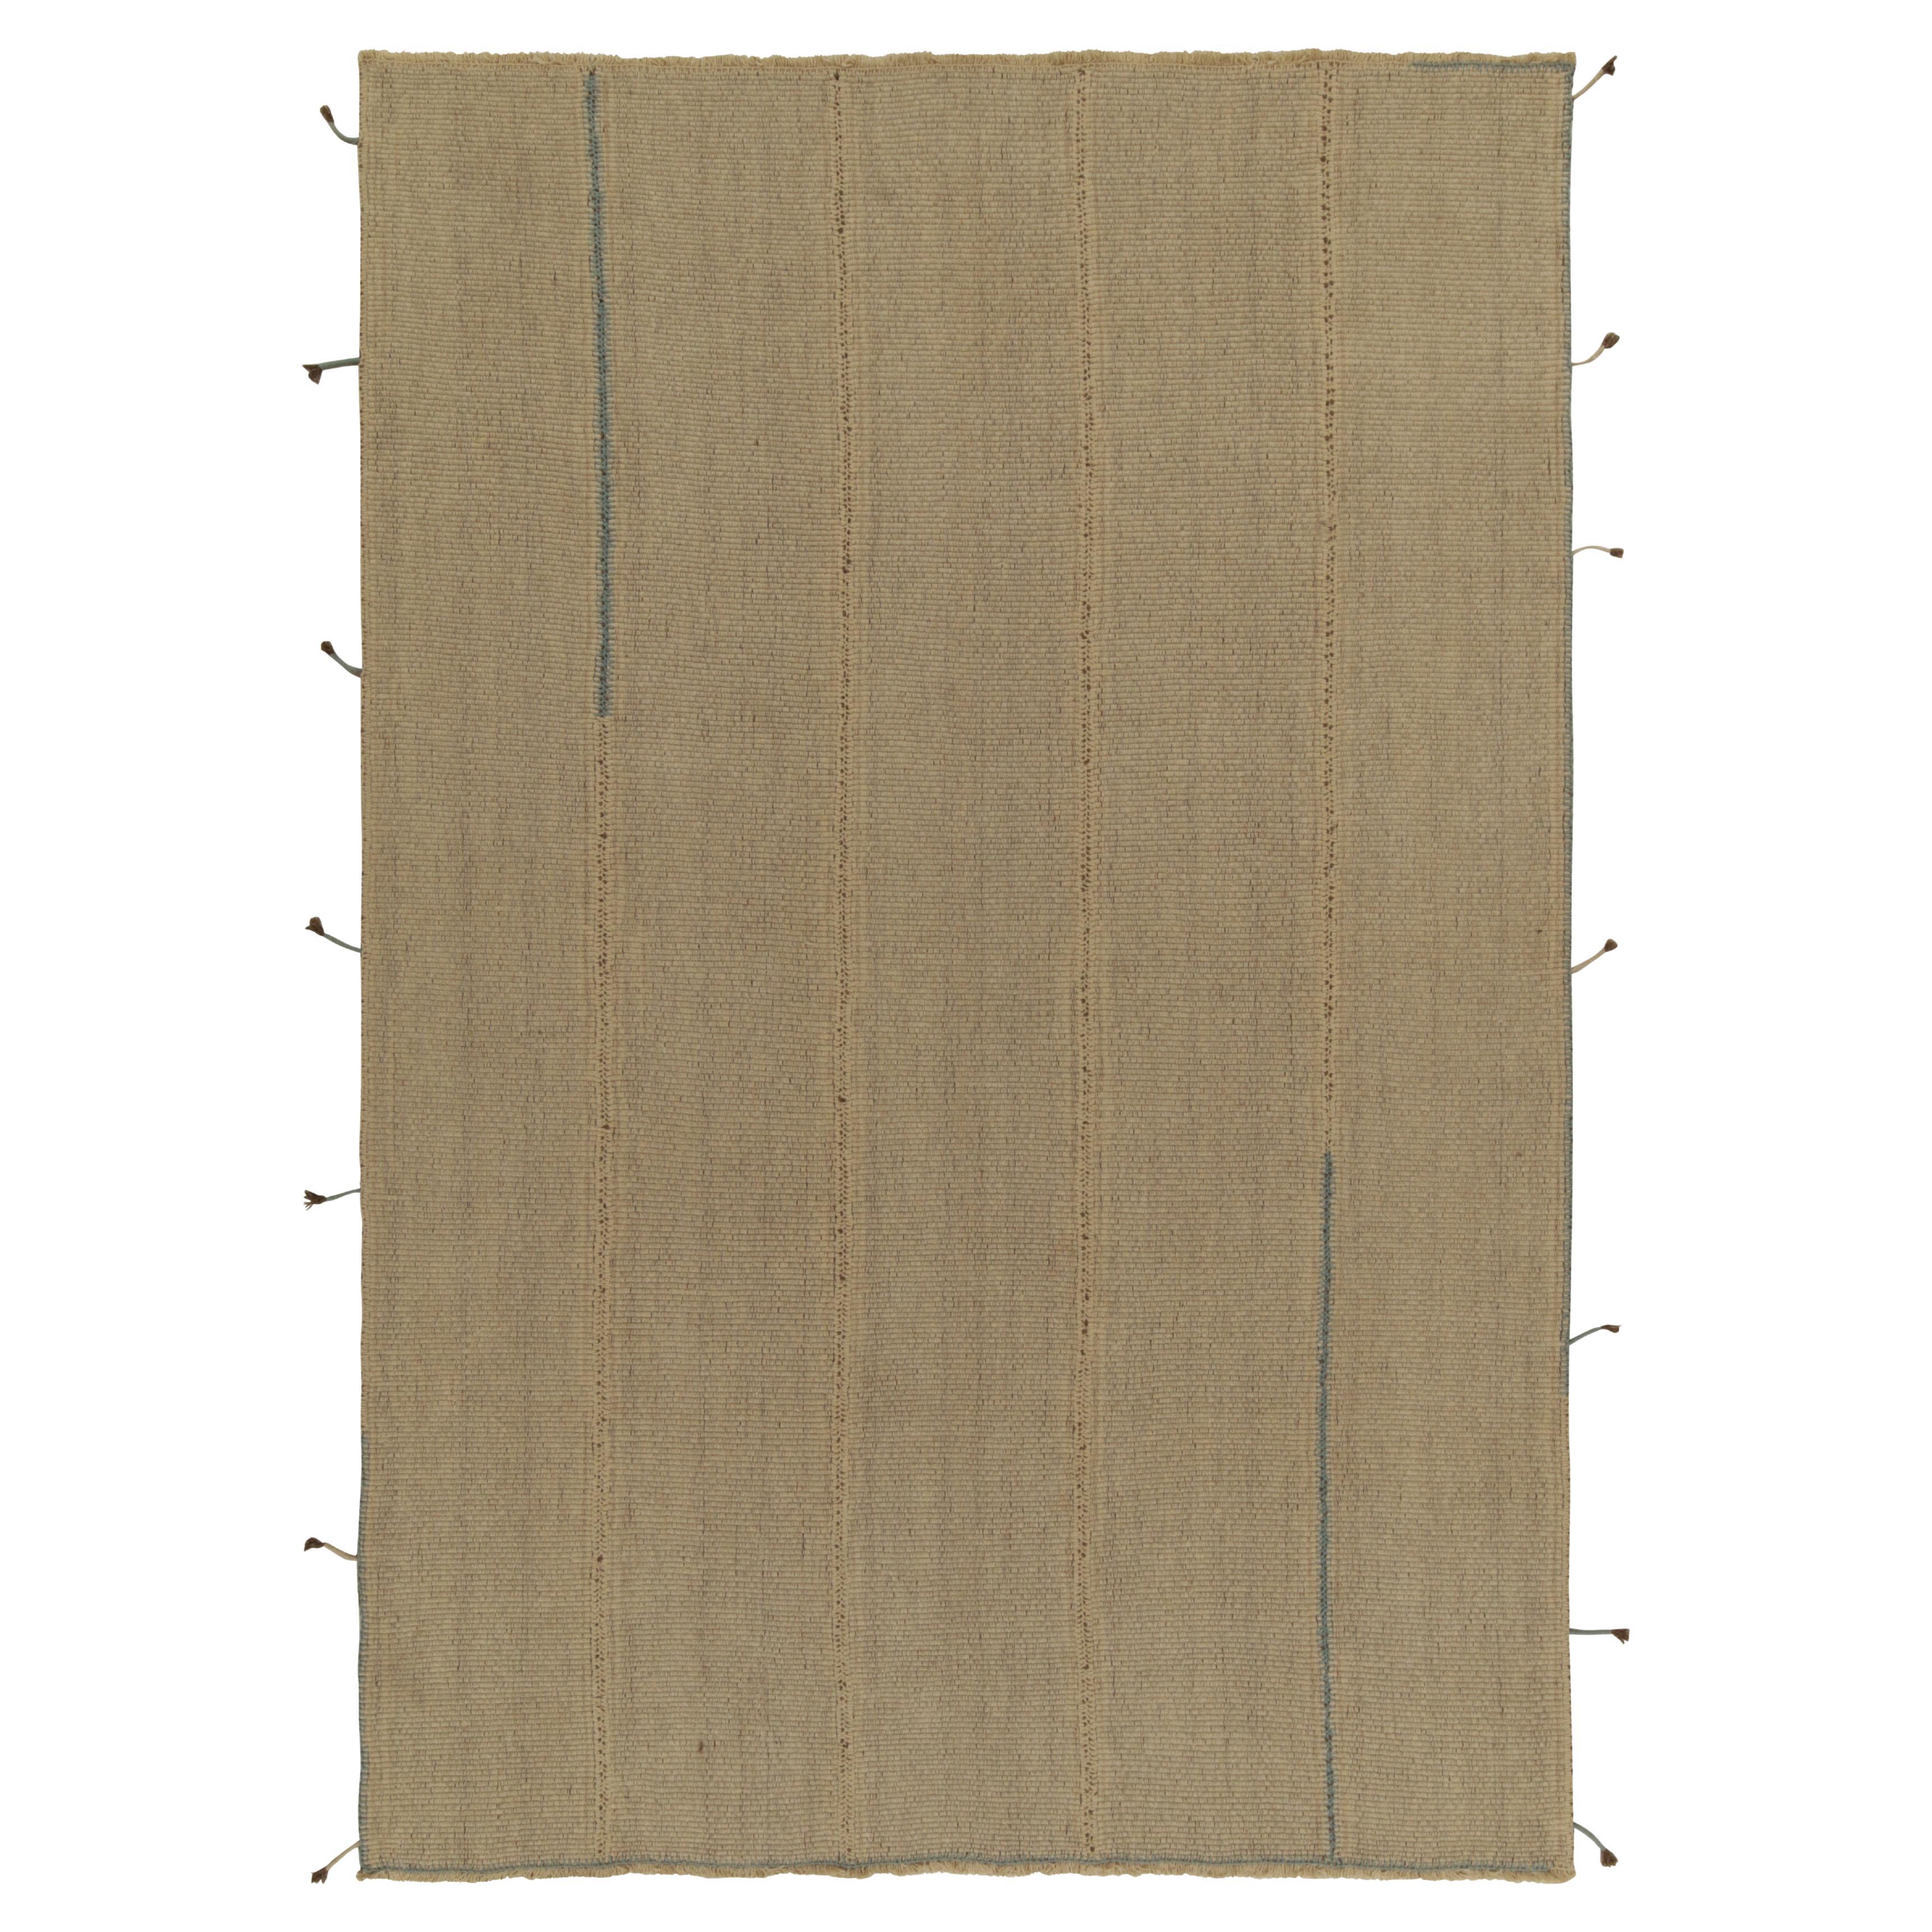 Rug & Kilim’s Contemporary Kilim in Sandy Solid Beige-Brown with Blue Accents For Sale